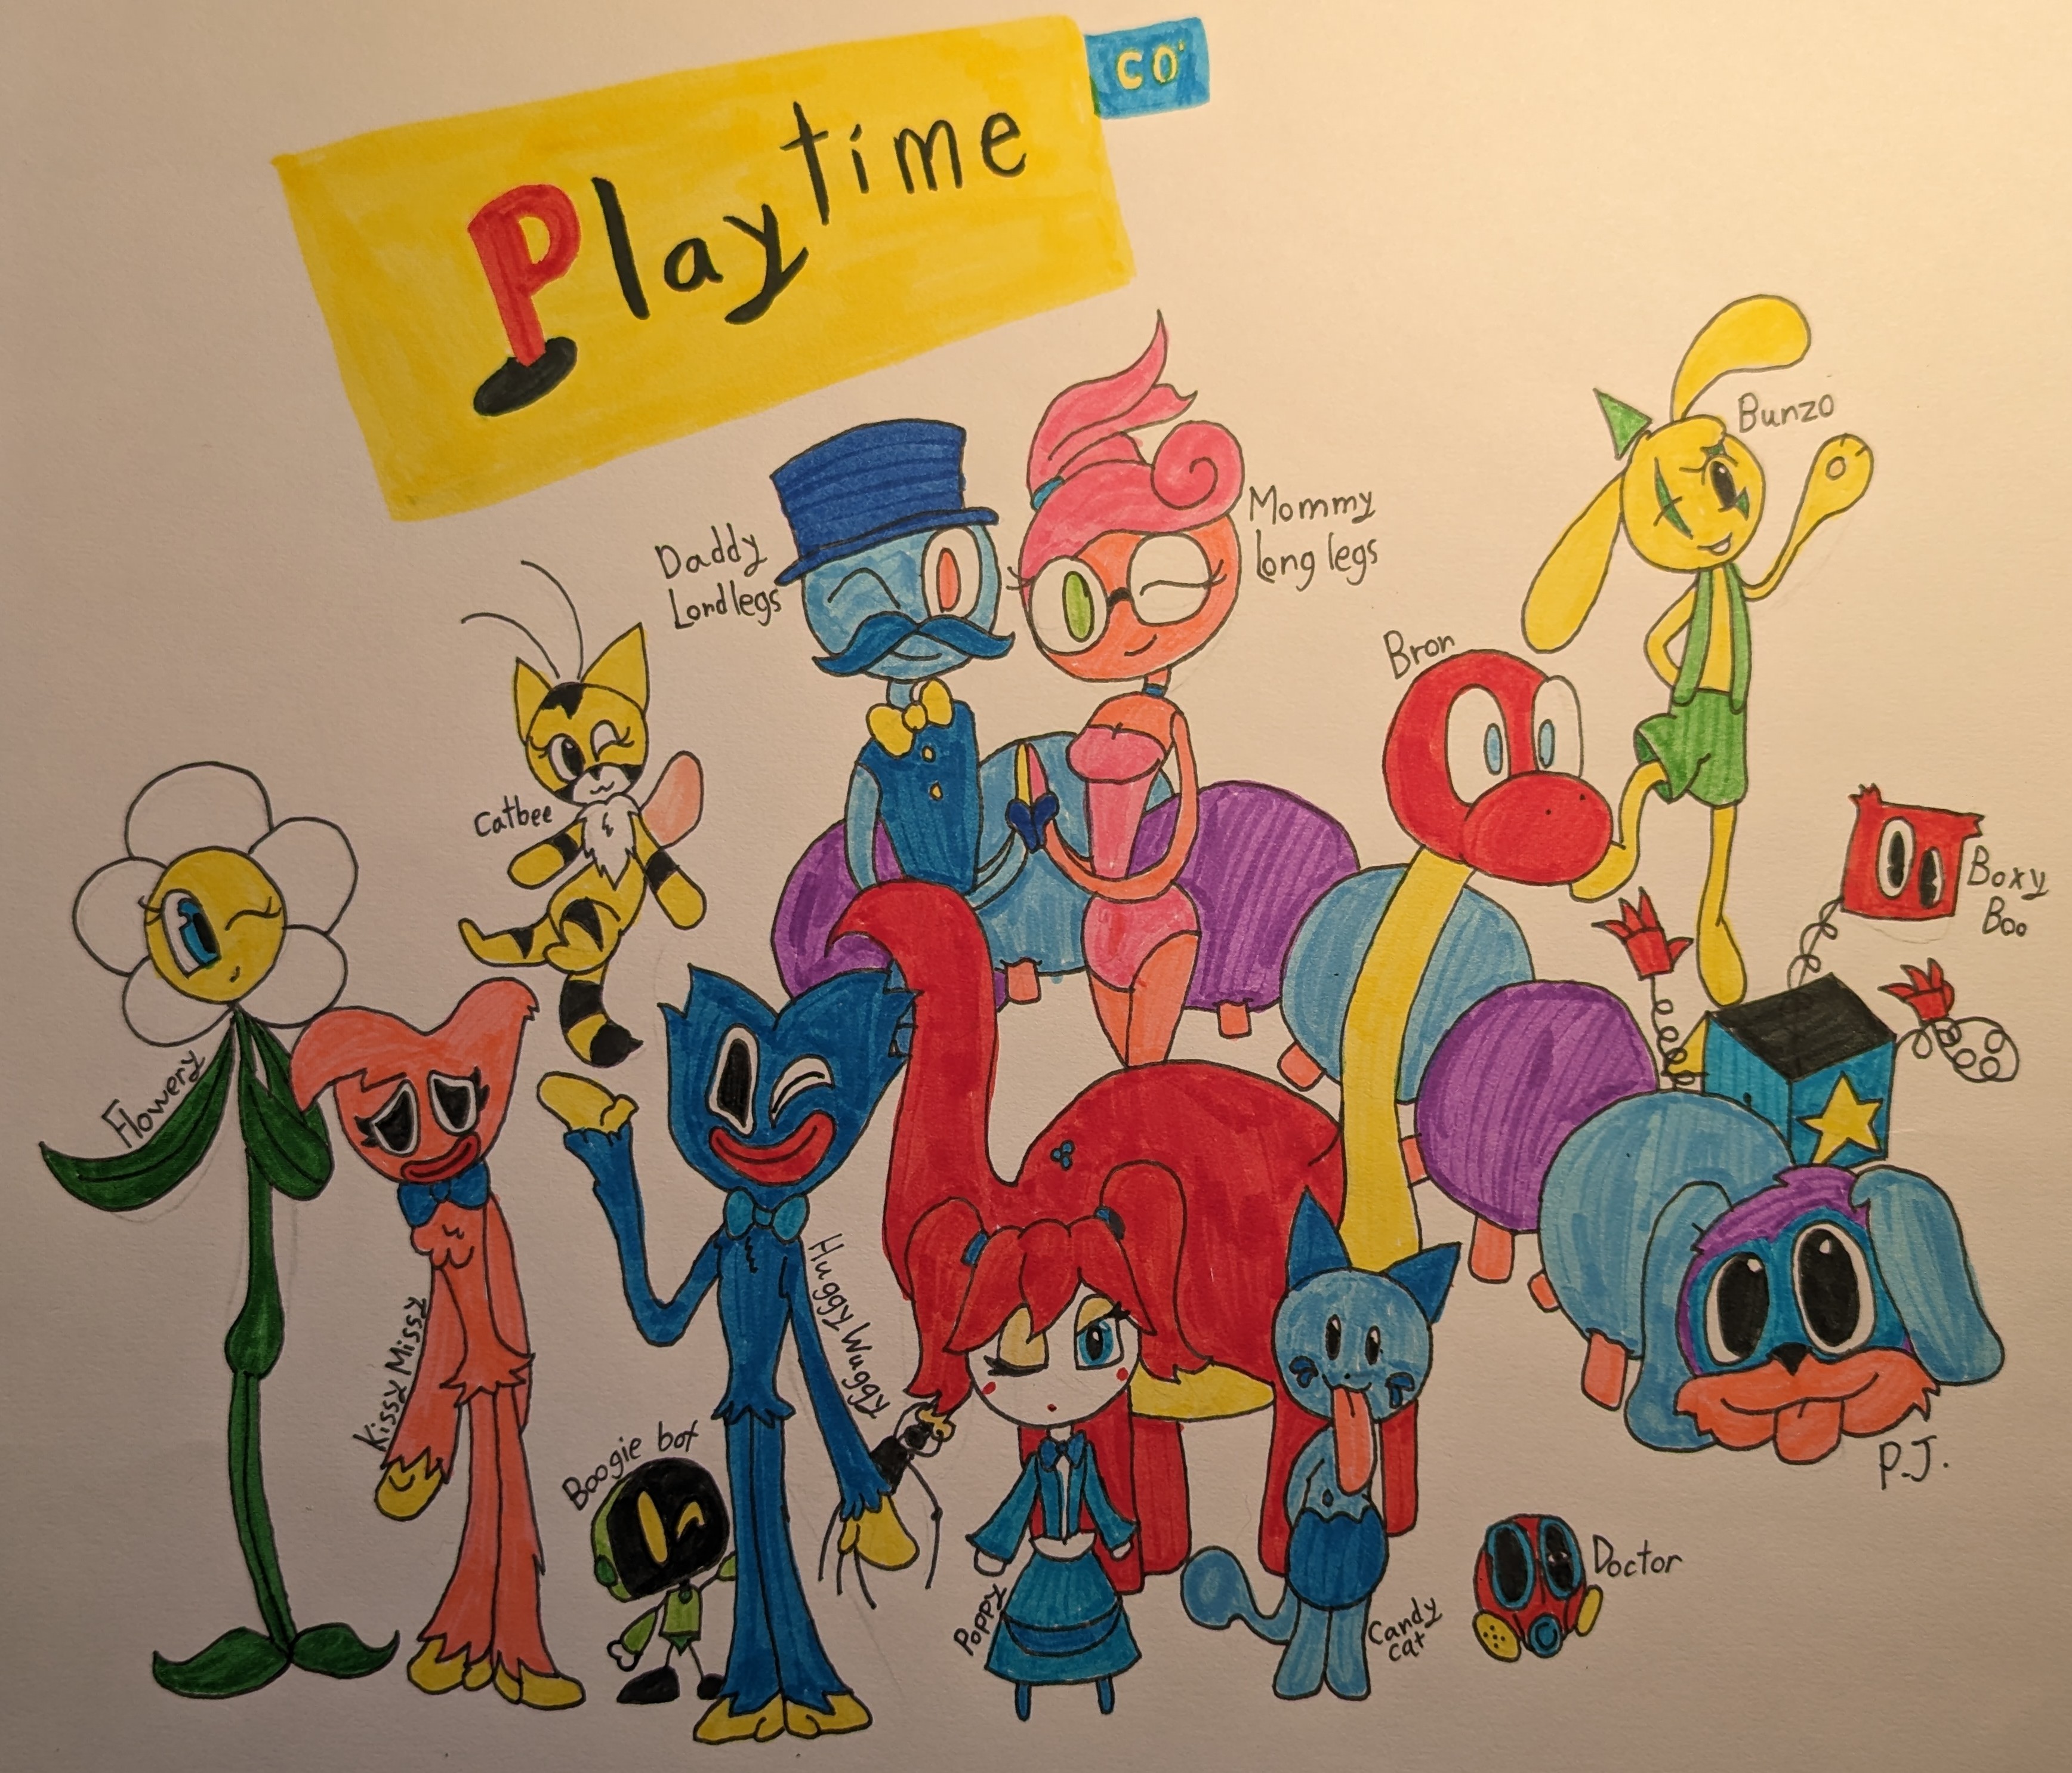 Project: Playtime (@Proj_Playtime) / X